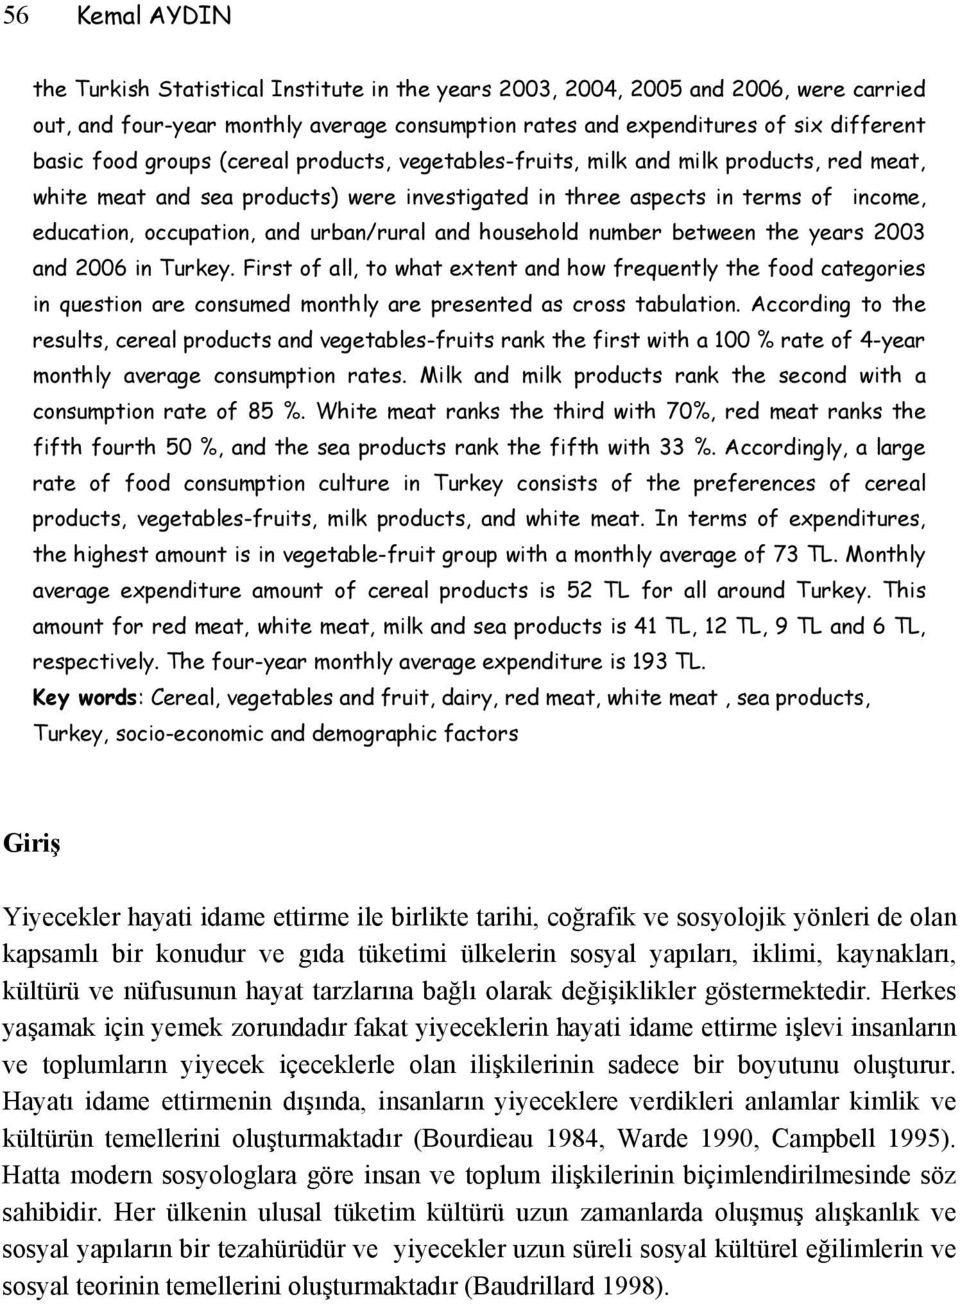 urban/rural and household number between the years 2003 and 2006 in Turkey.